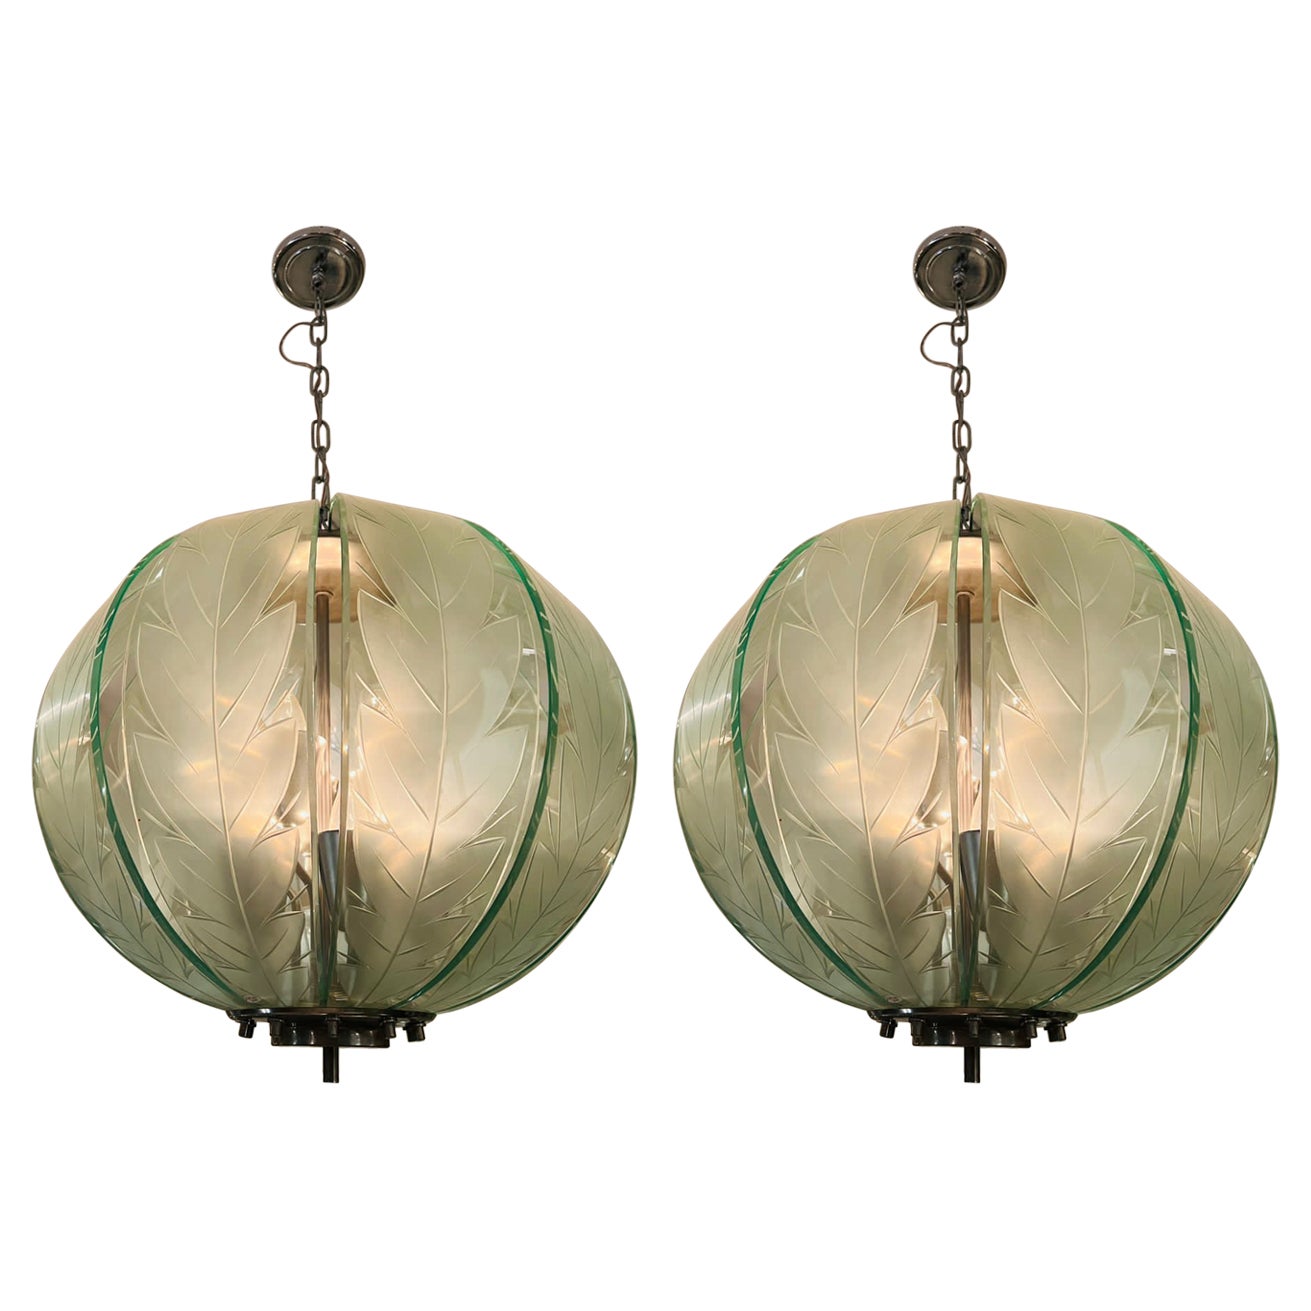 Fontana Arte pair of italian chandeliers in engraved glass and metal circa 1950